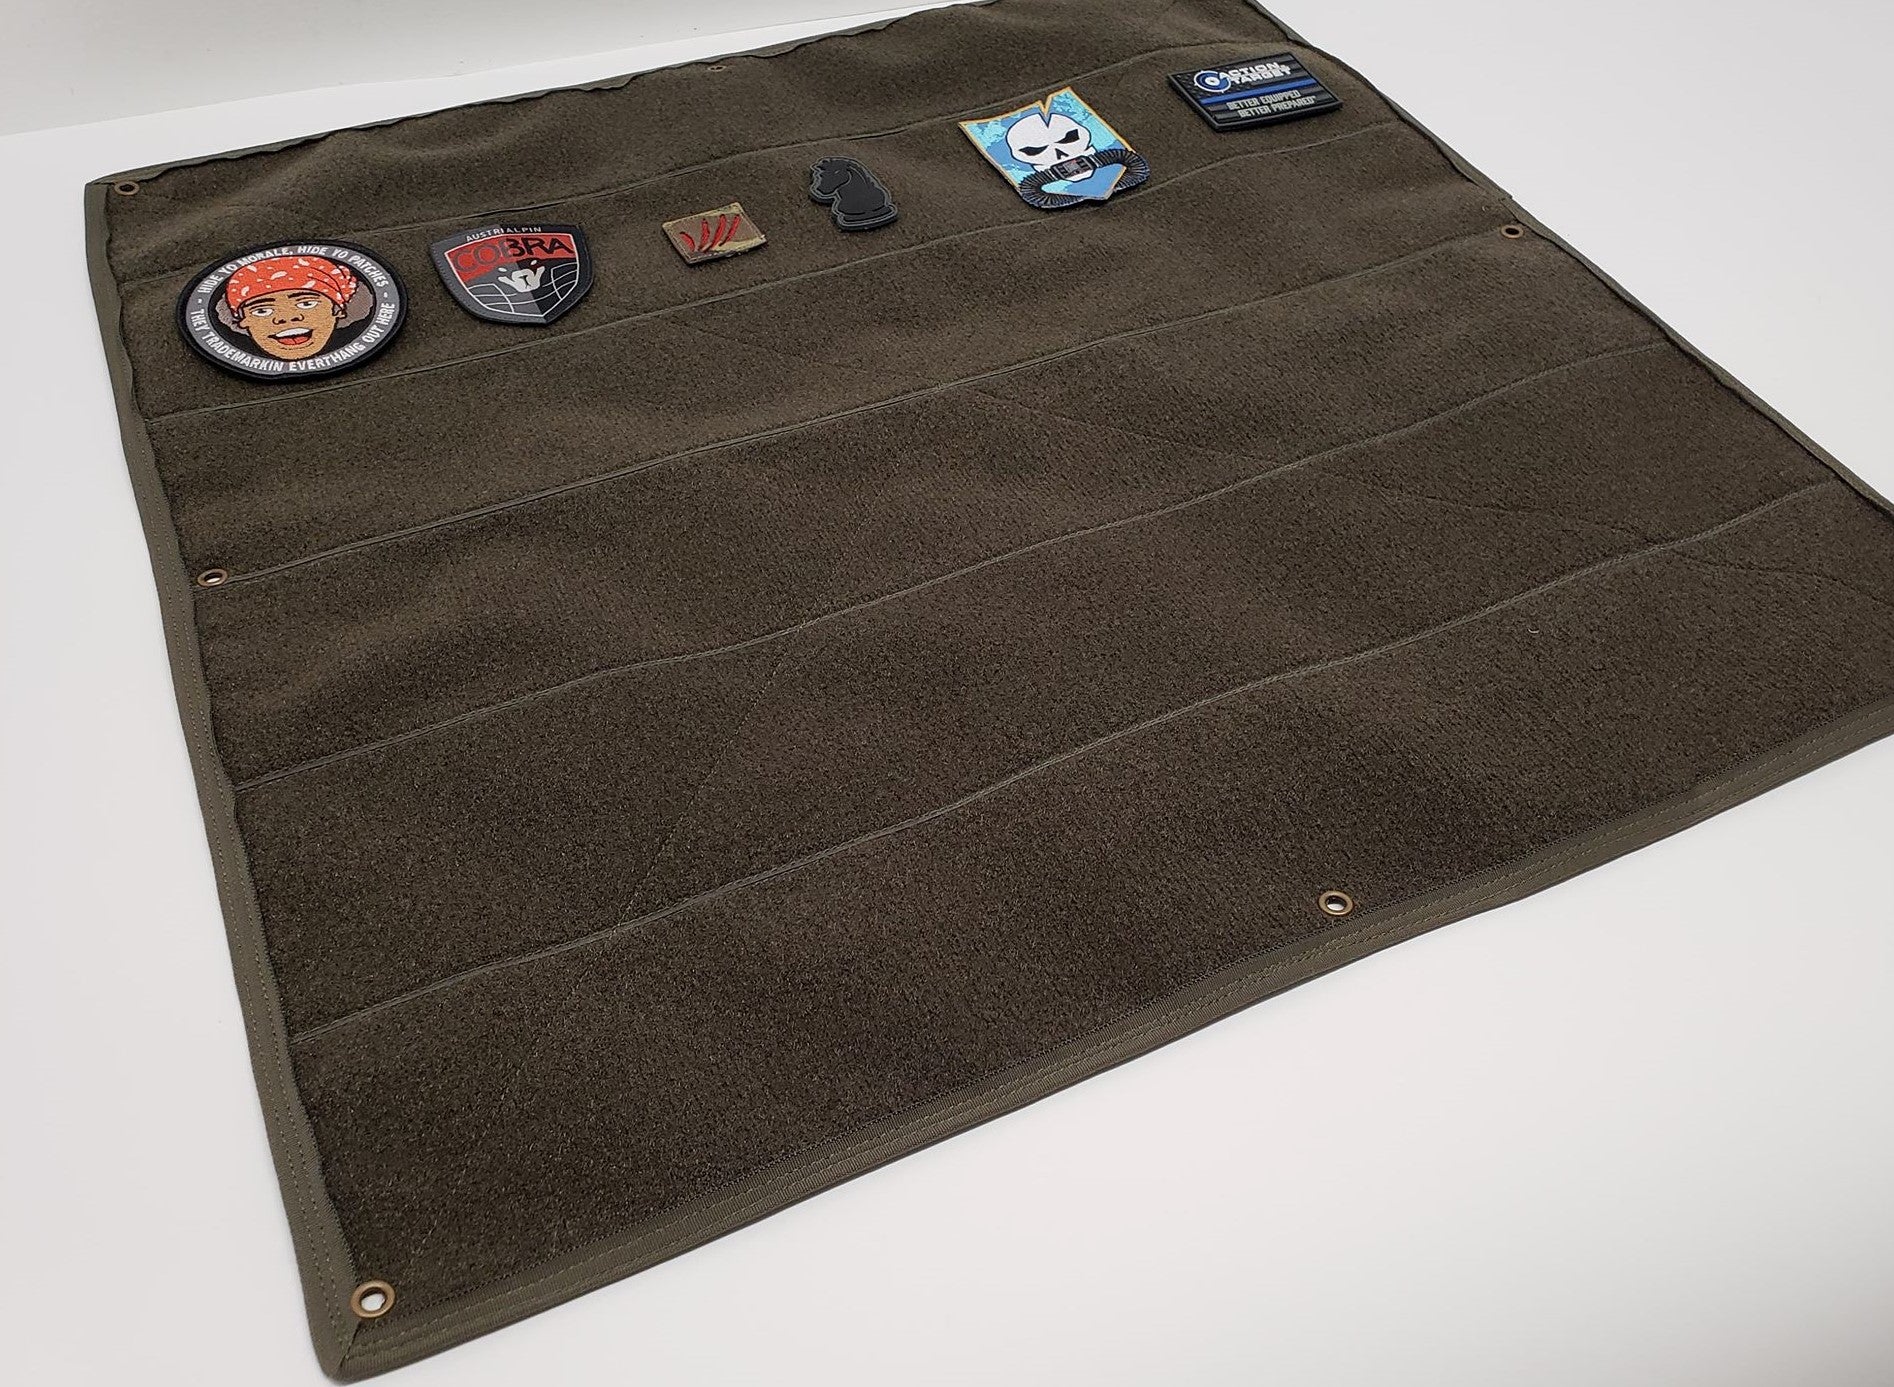 Voodoo Tactical Morale Patch Board  Up to 18% Off Free Shipping over $49!